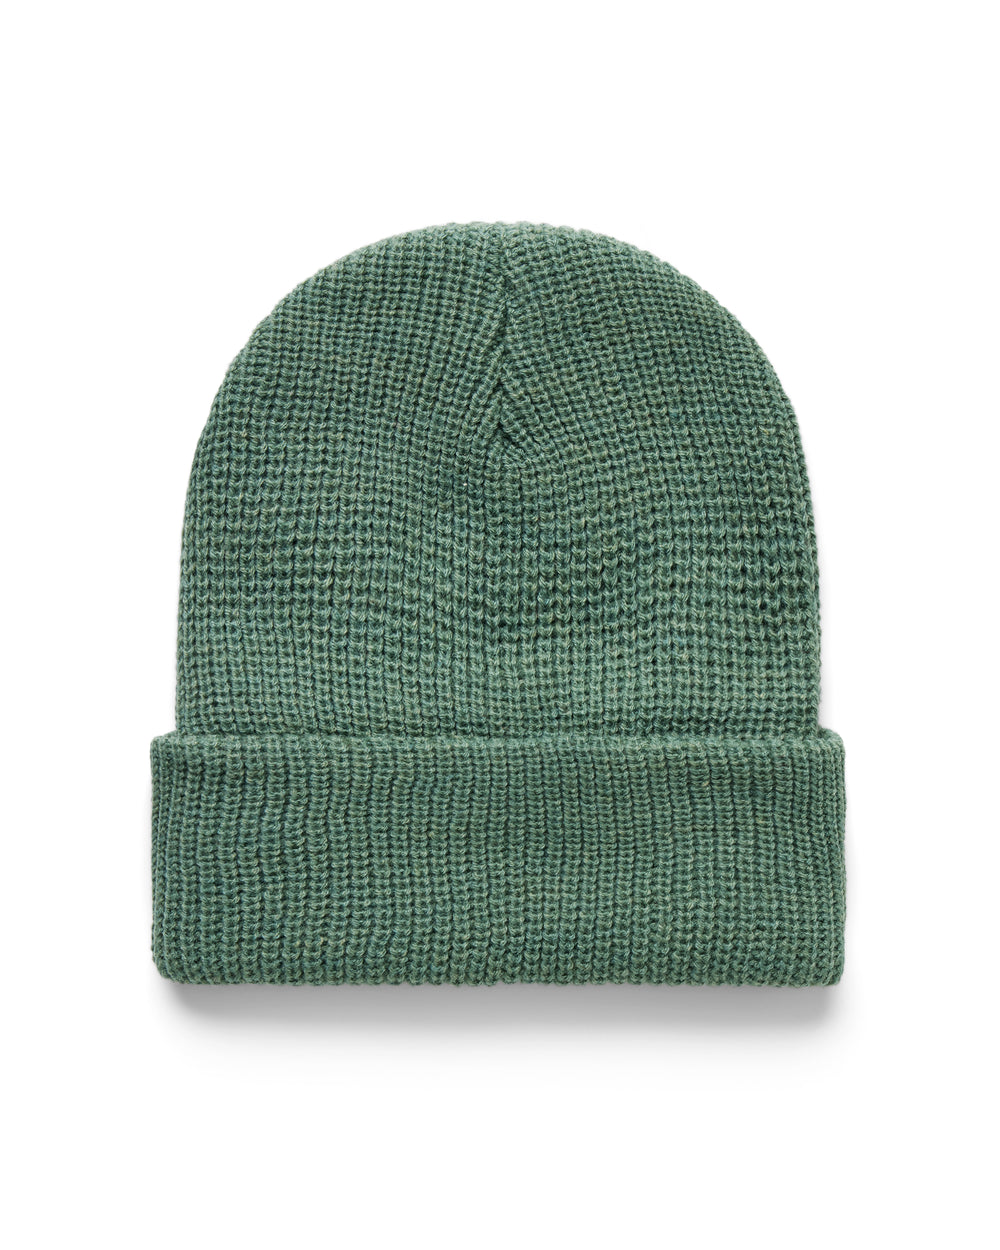 'YOU ARE ON NATIVE LAND' RIBBED BEANIE - JADE